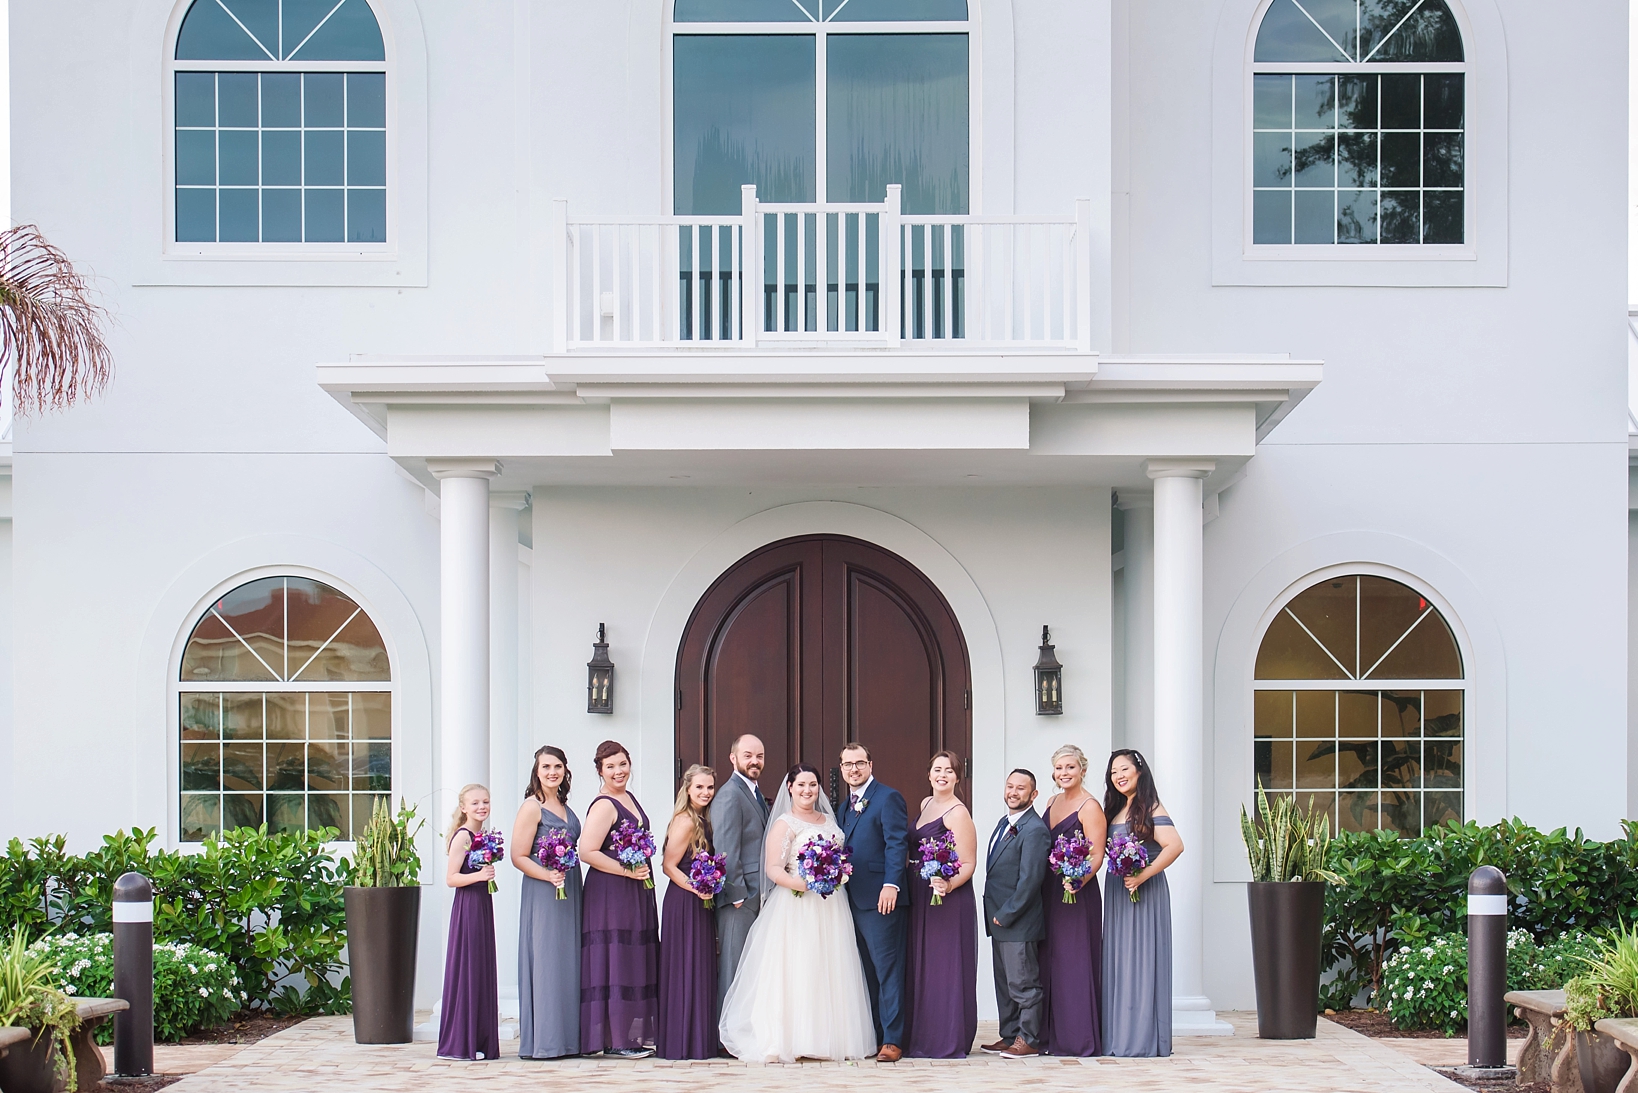 The bridal party pose outside the chapel by Sarah & Ben Photography